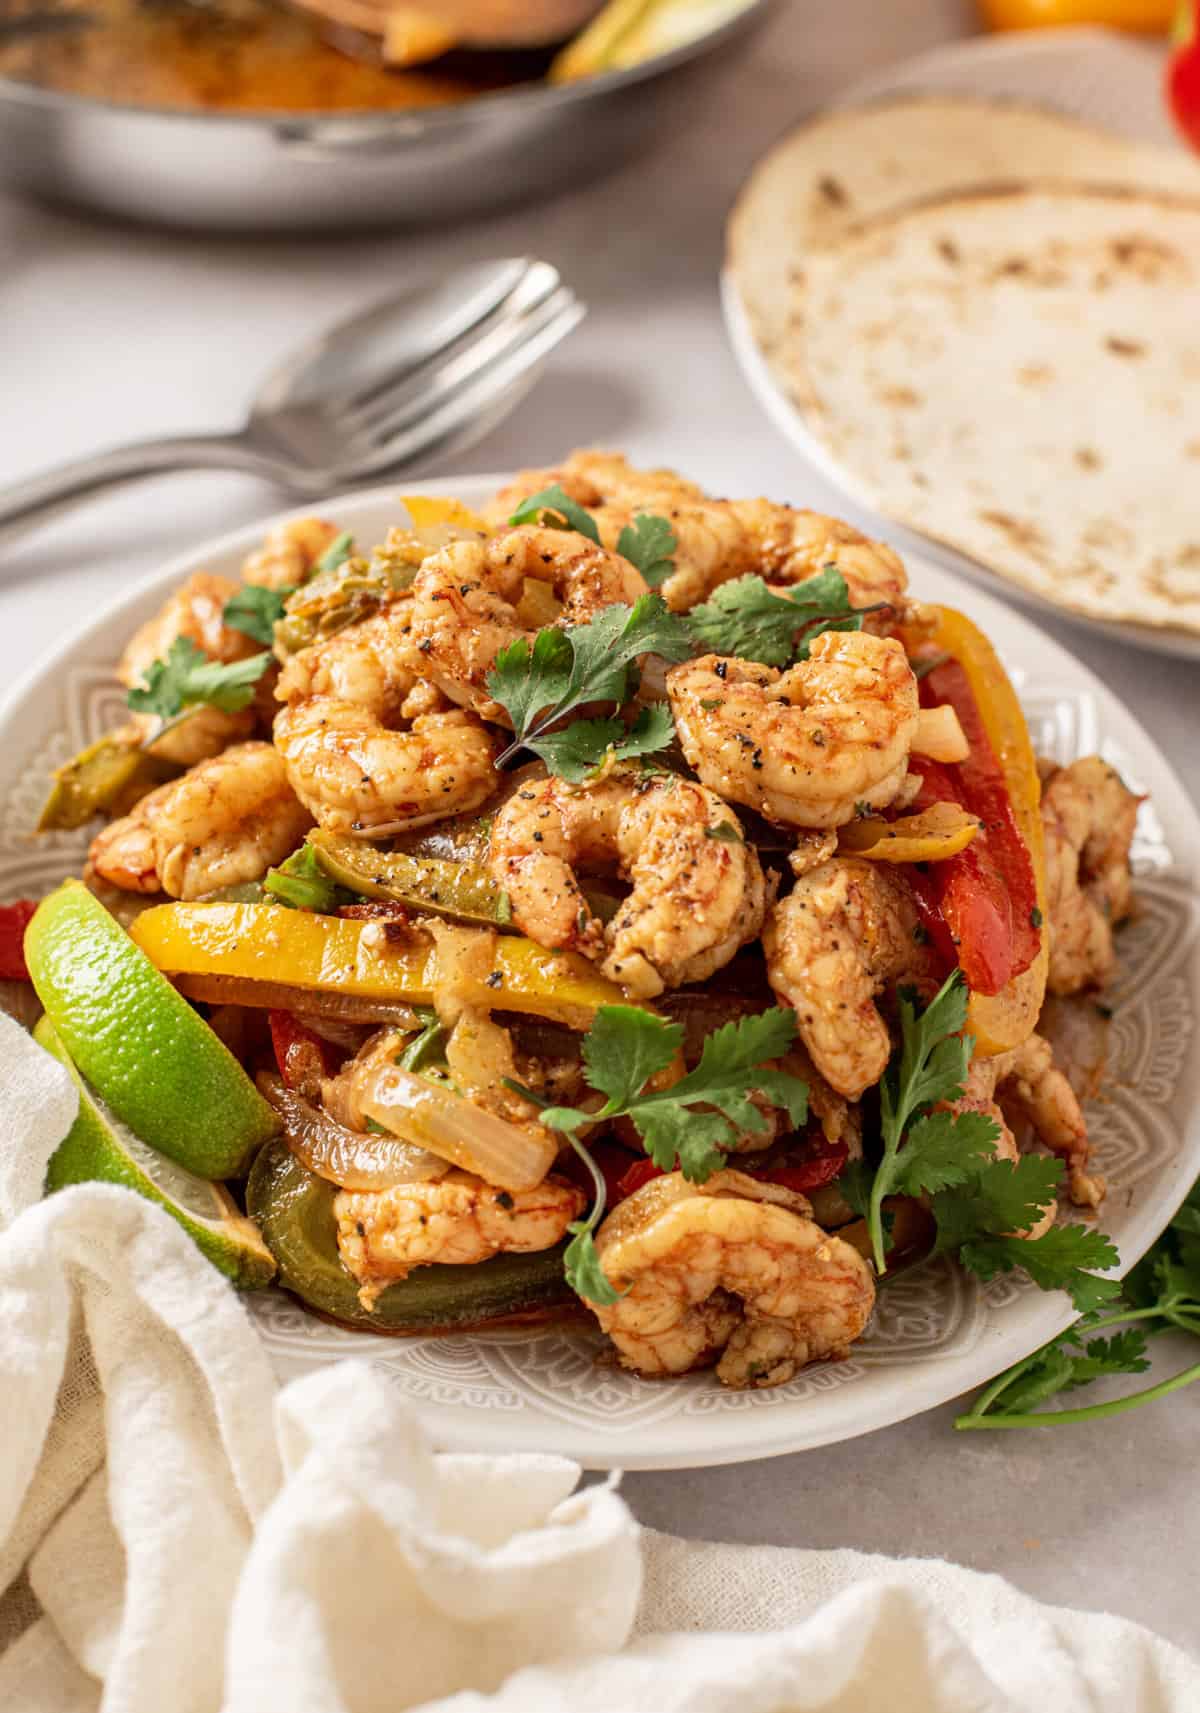 Shrimp fajitas are presented on a white plate with cilantro and a lime wedge.